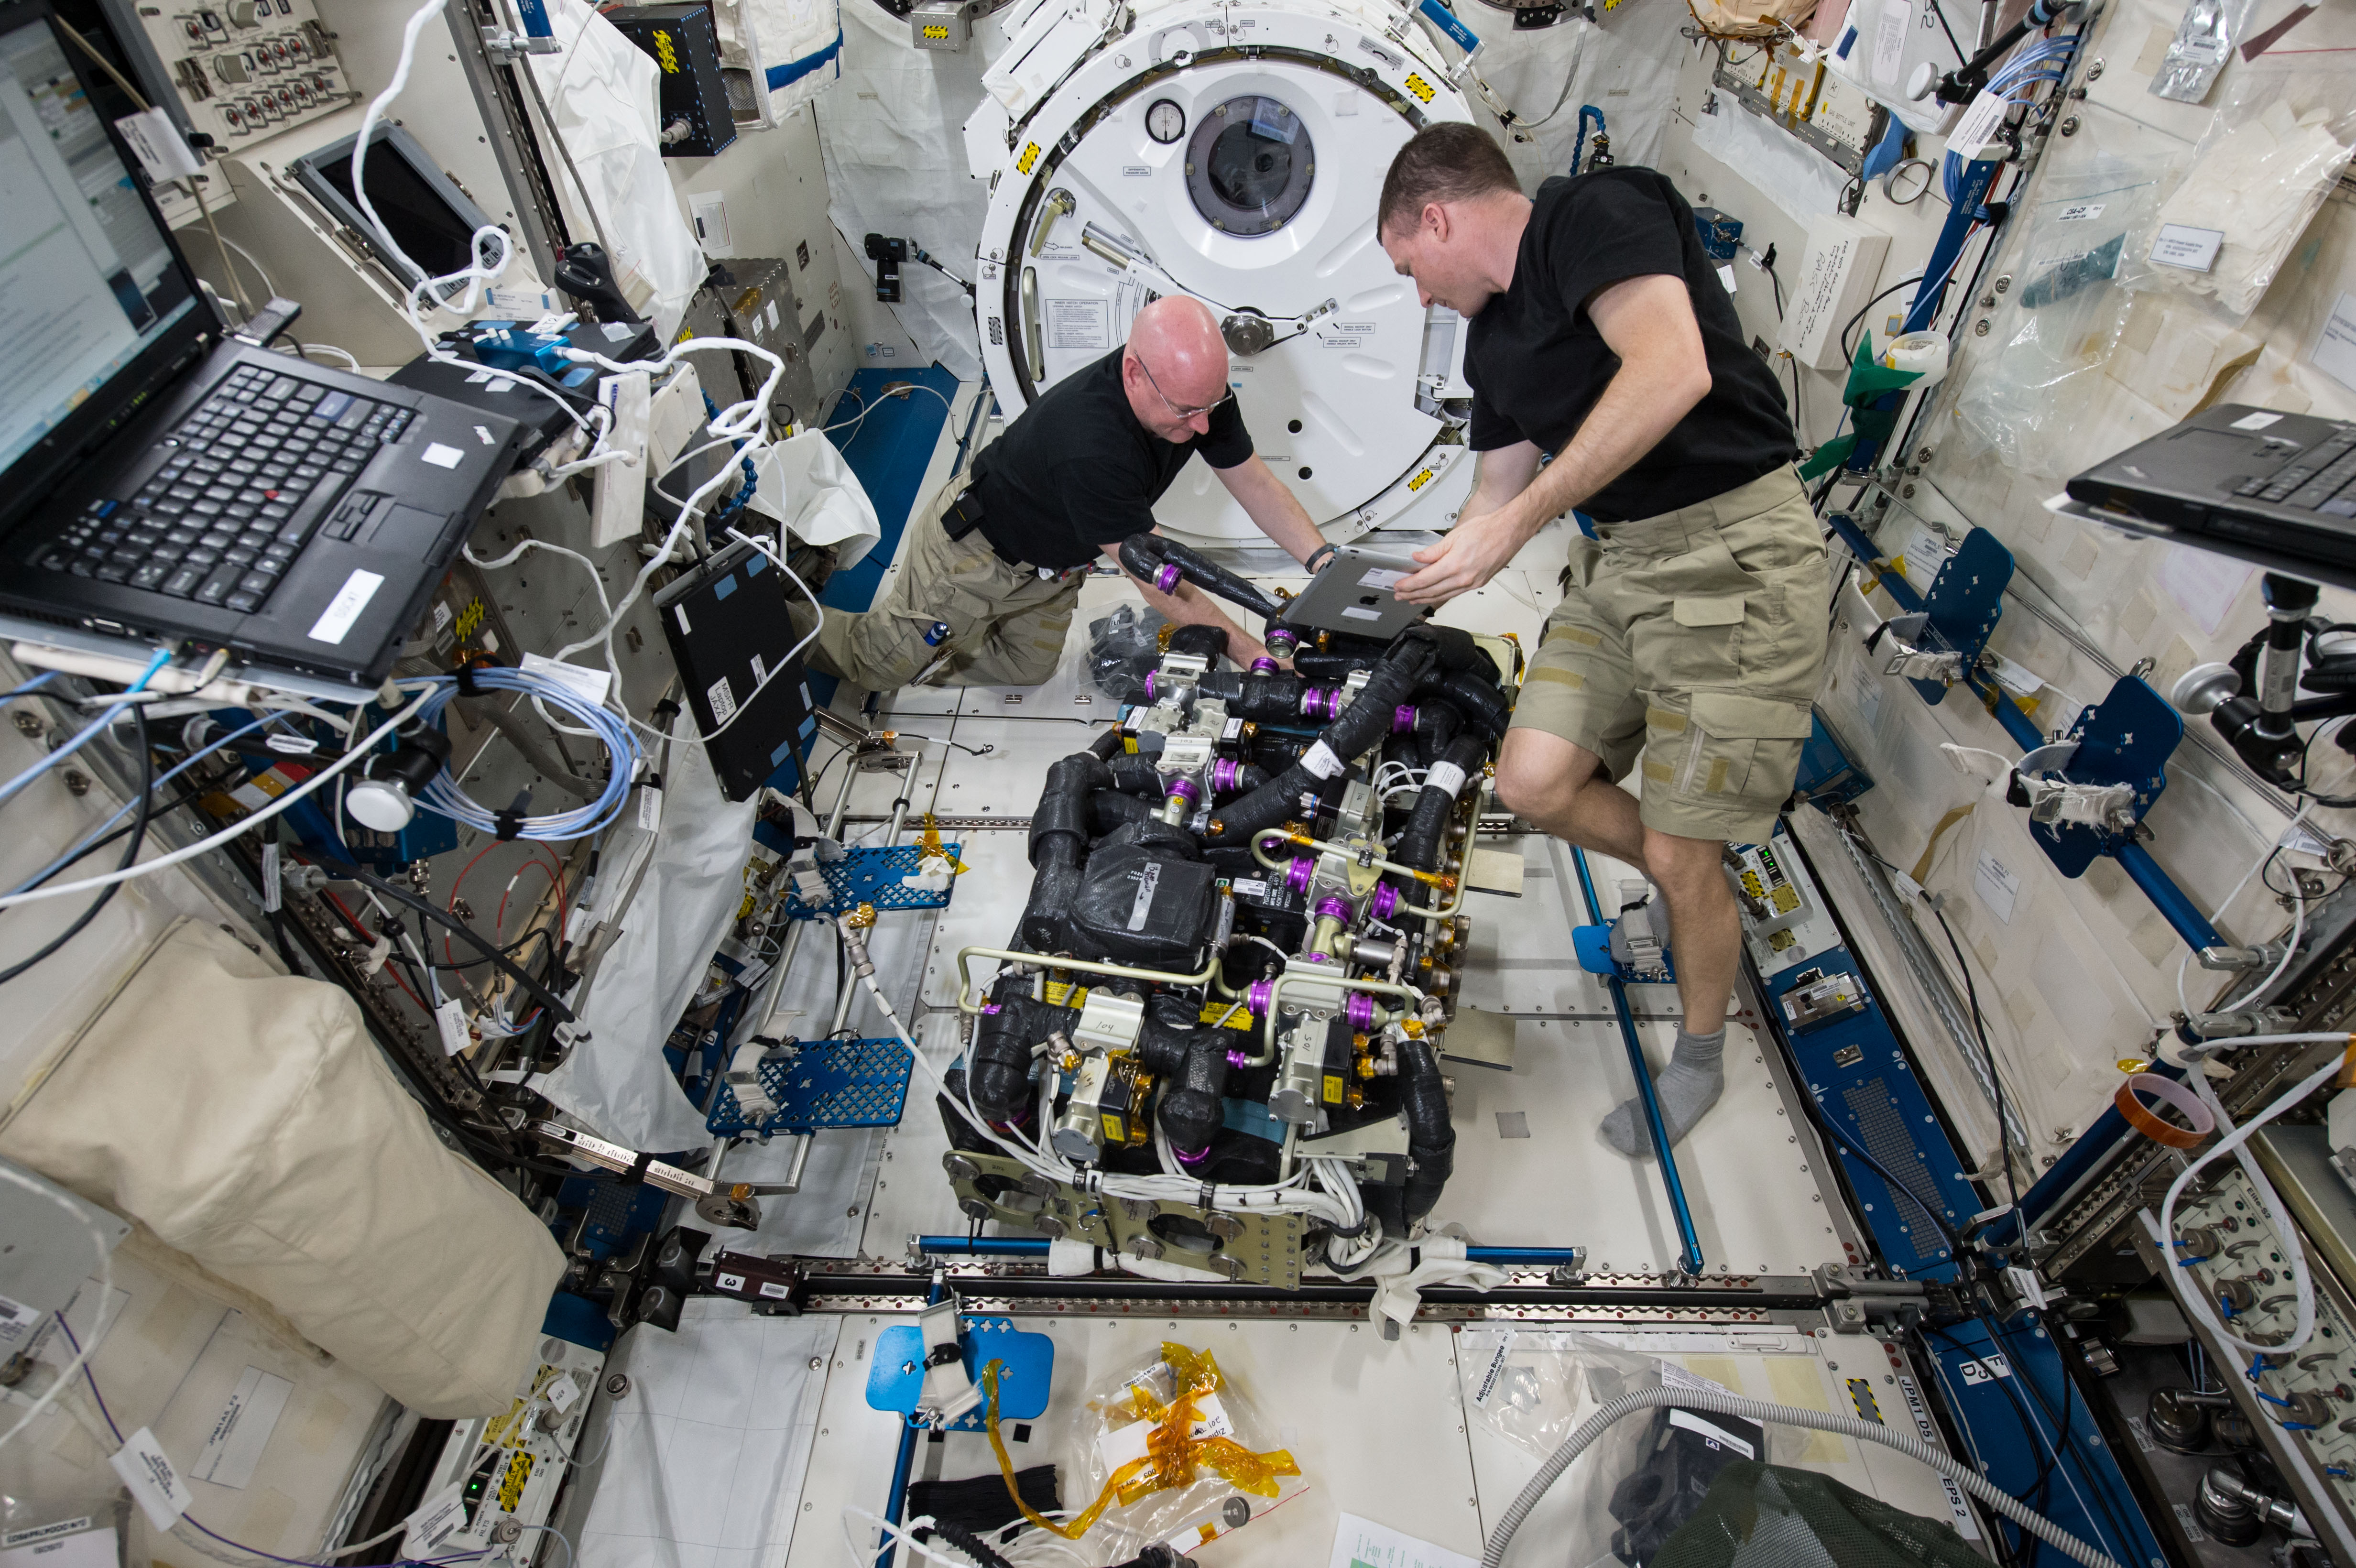 NASA image: Astronauts at work on the International Space Station